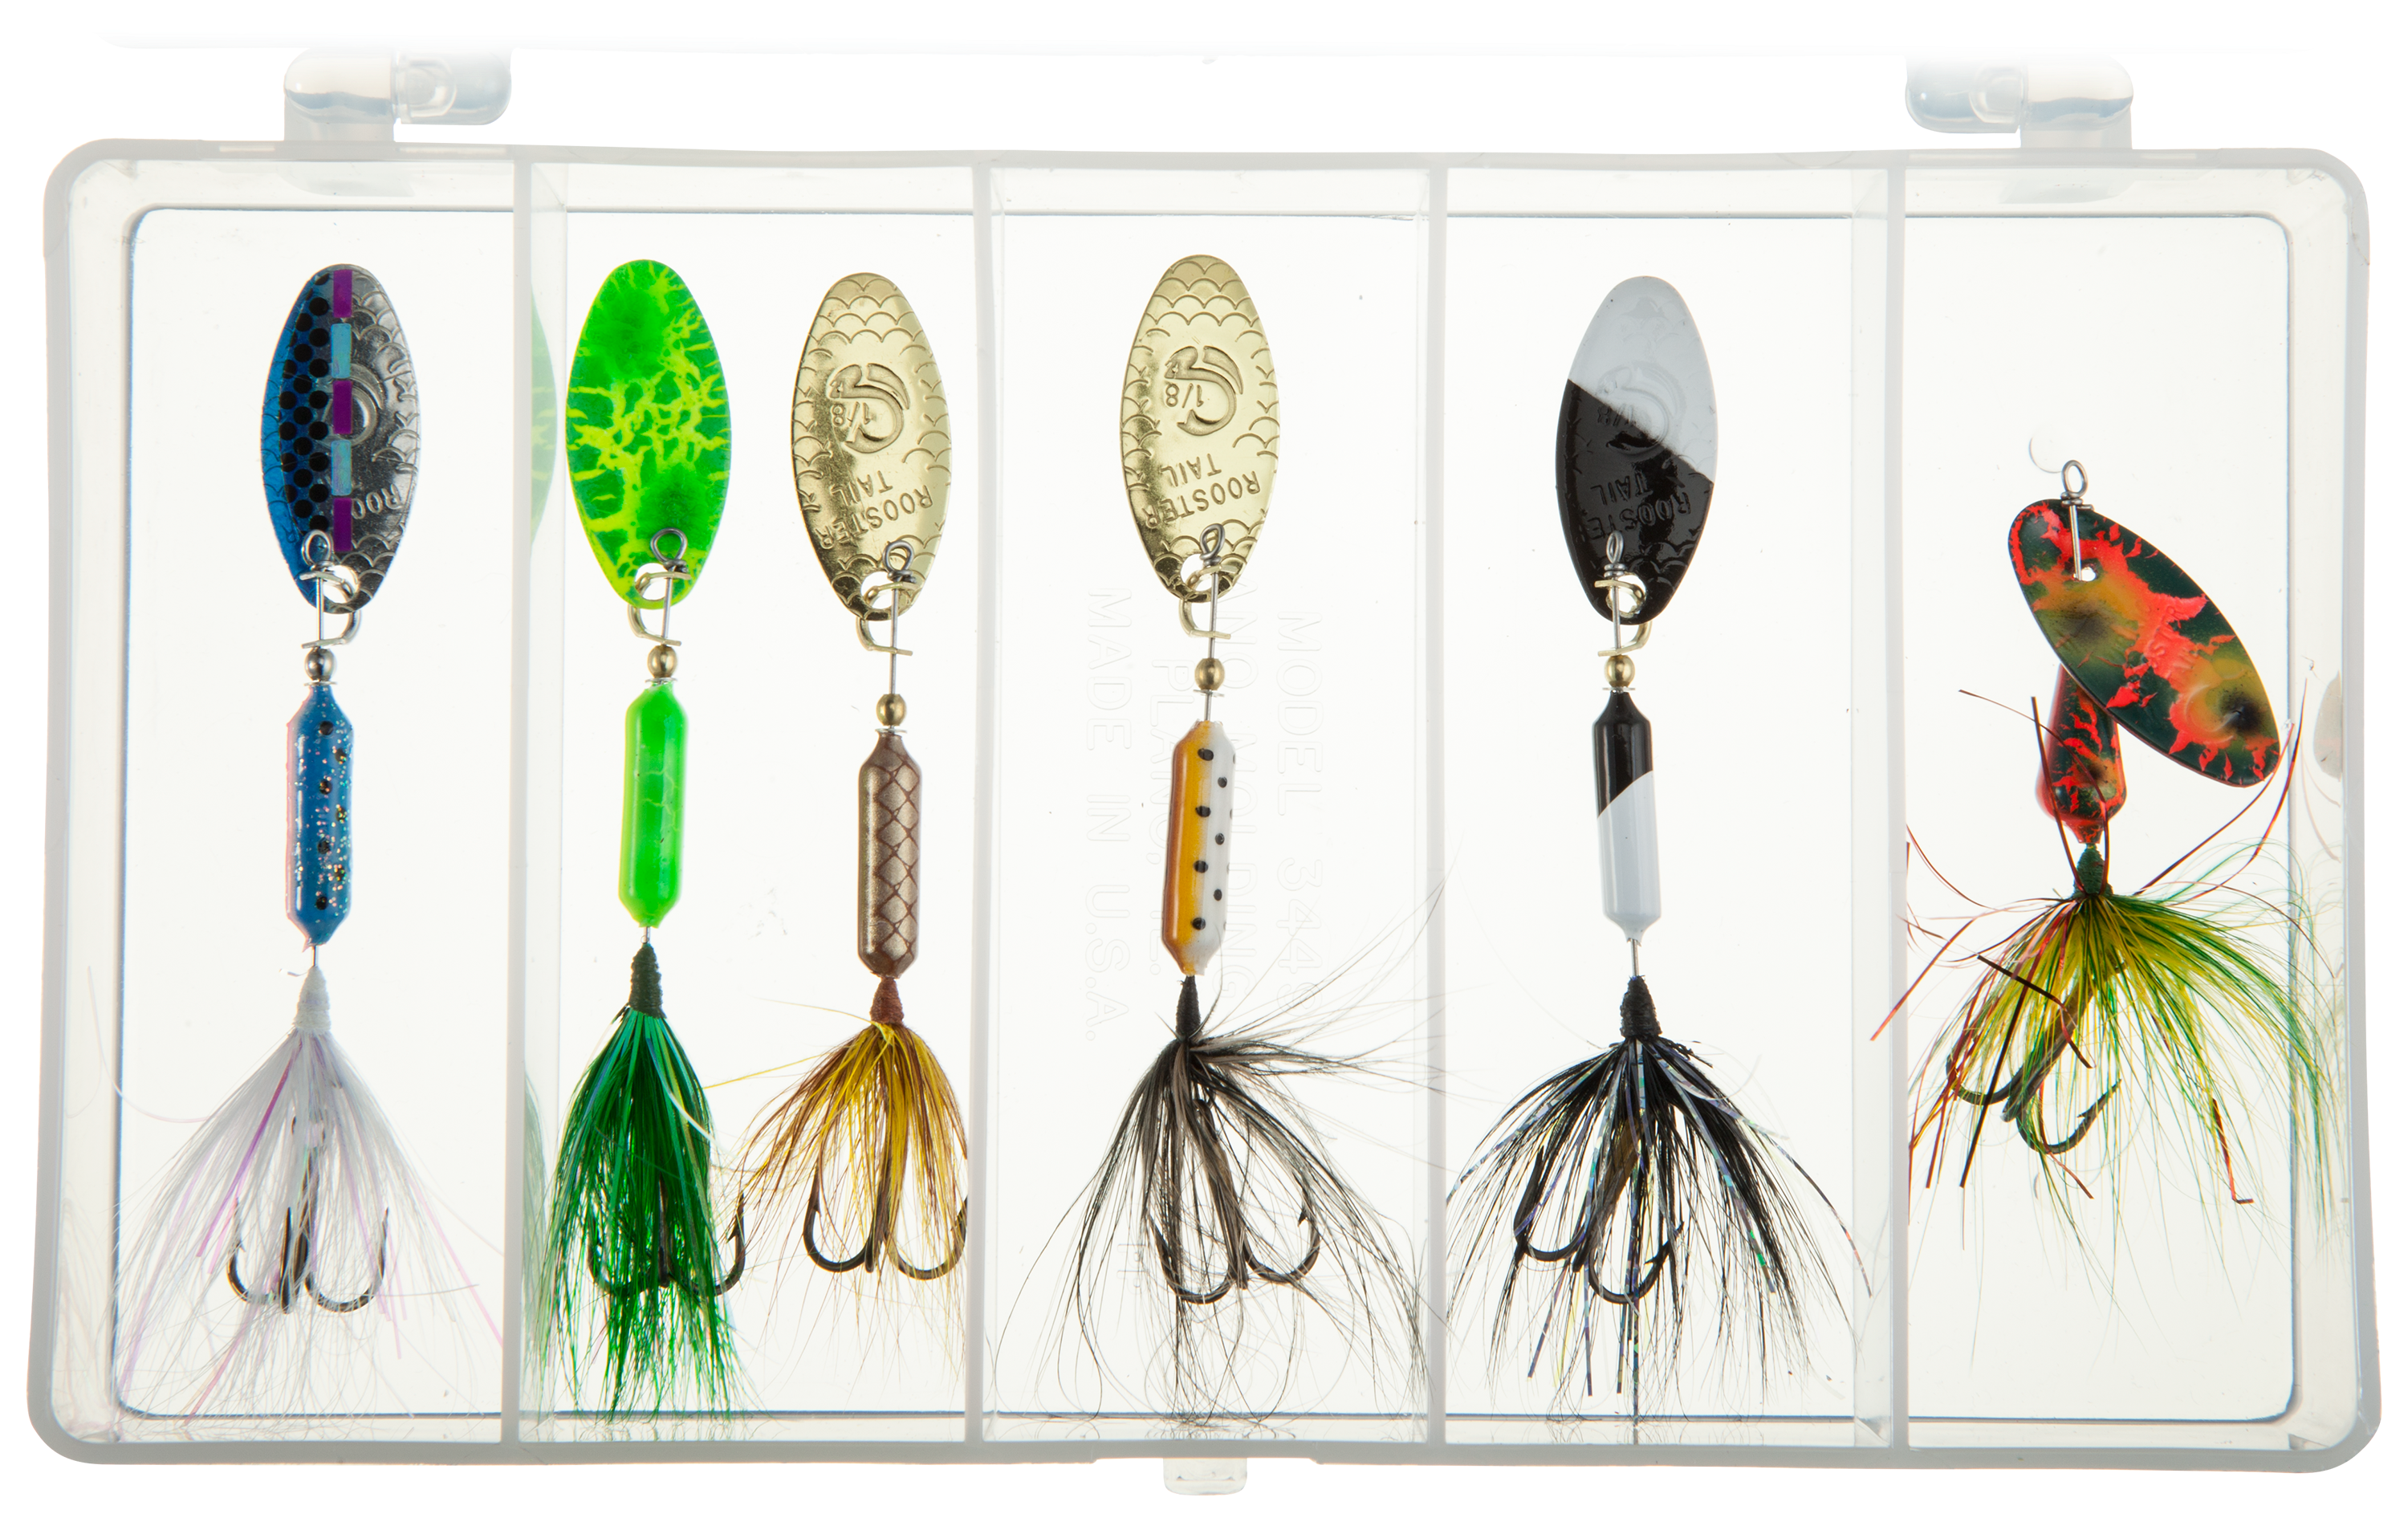 Worden's Rooster Tail Trout Pak